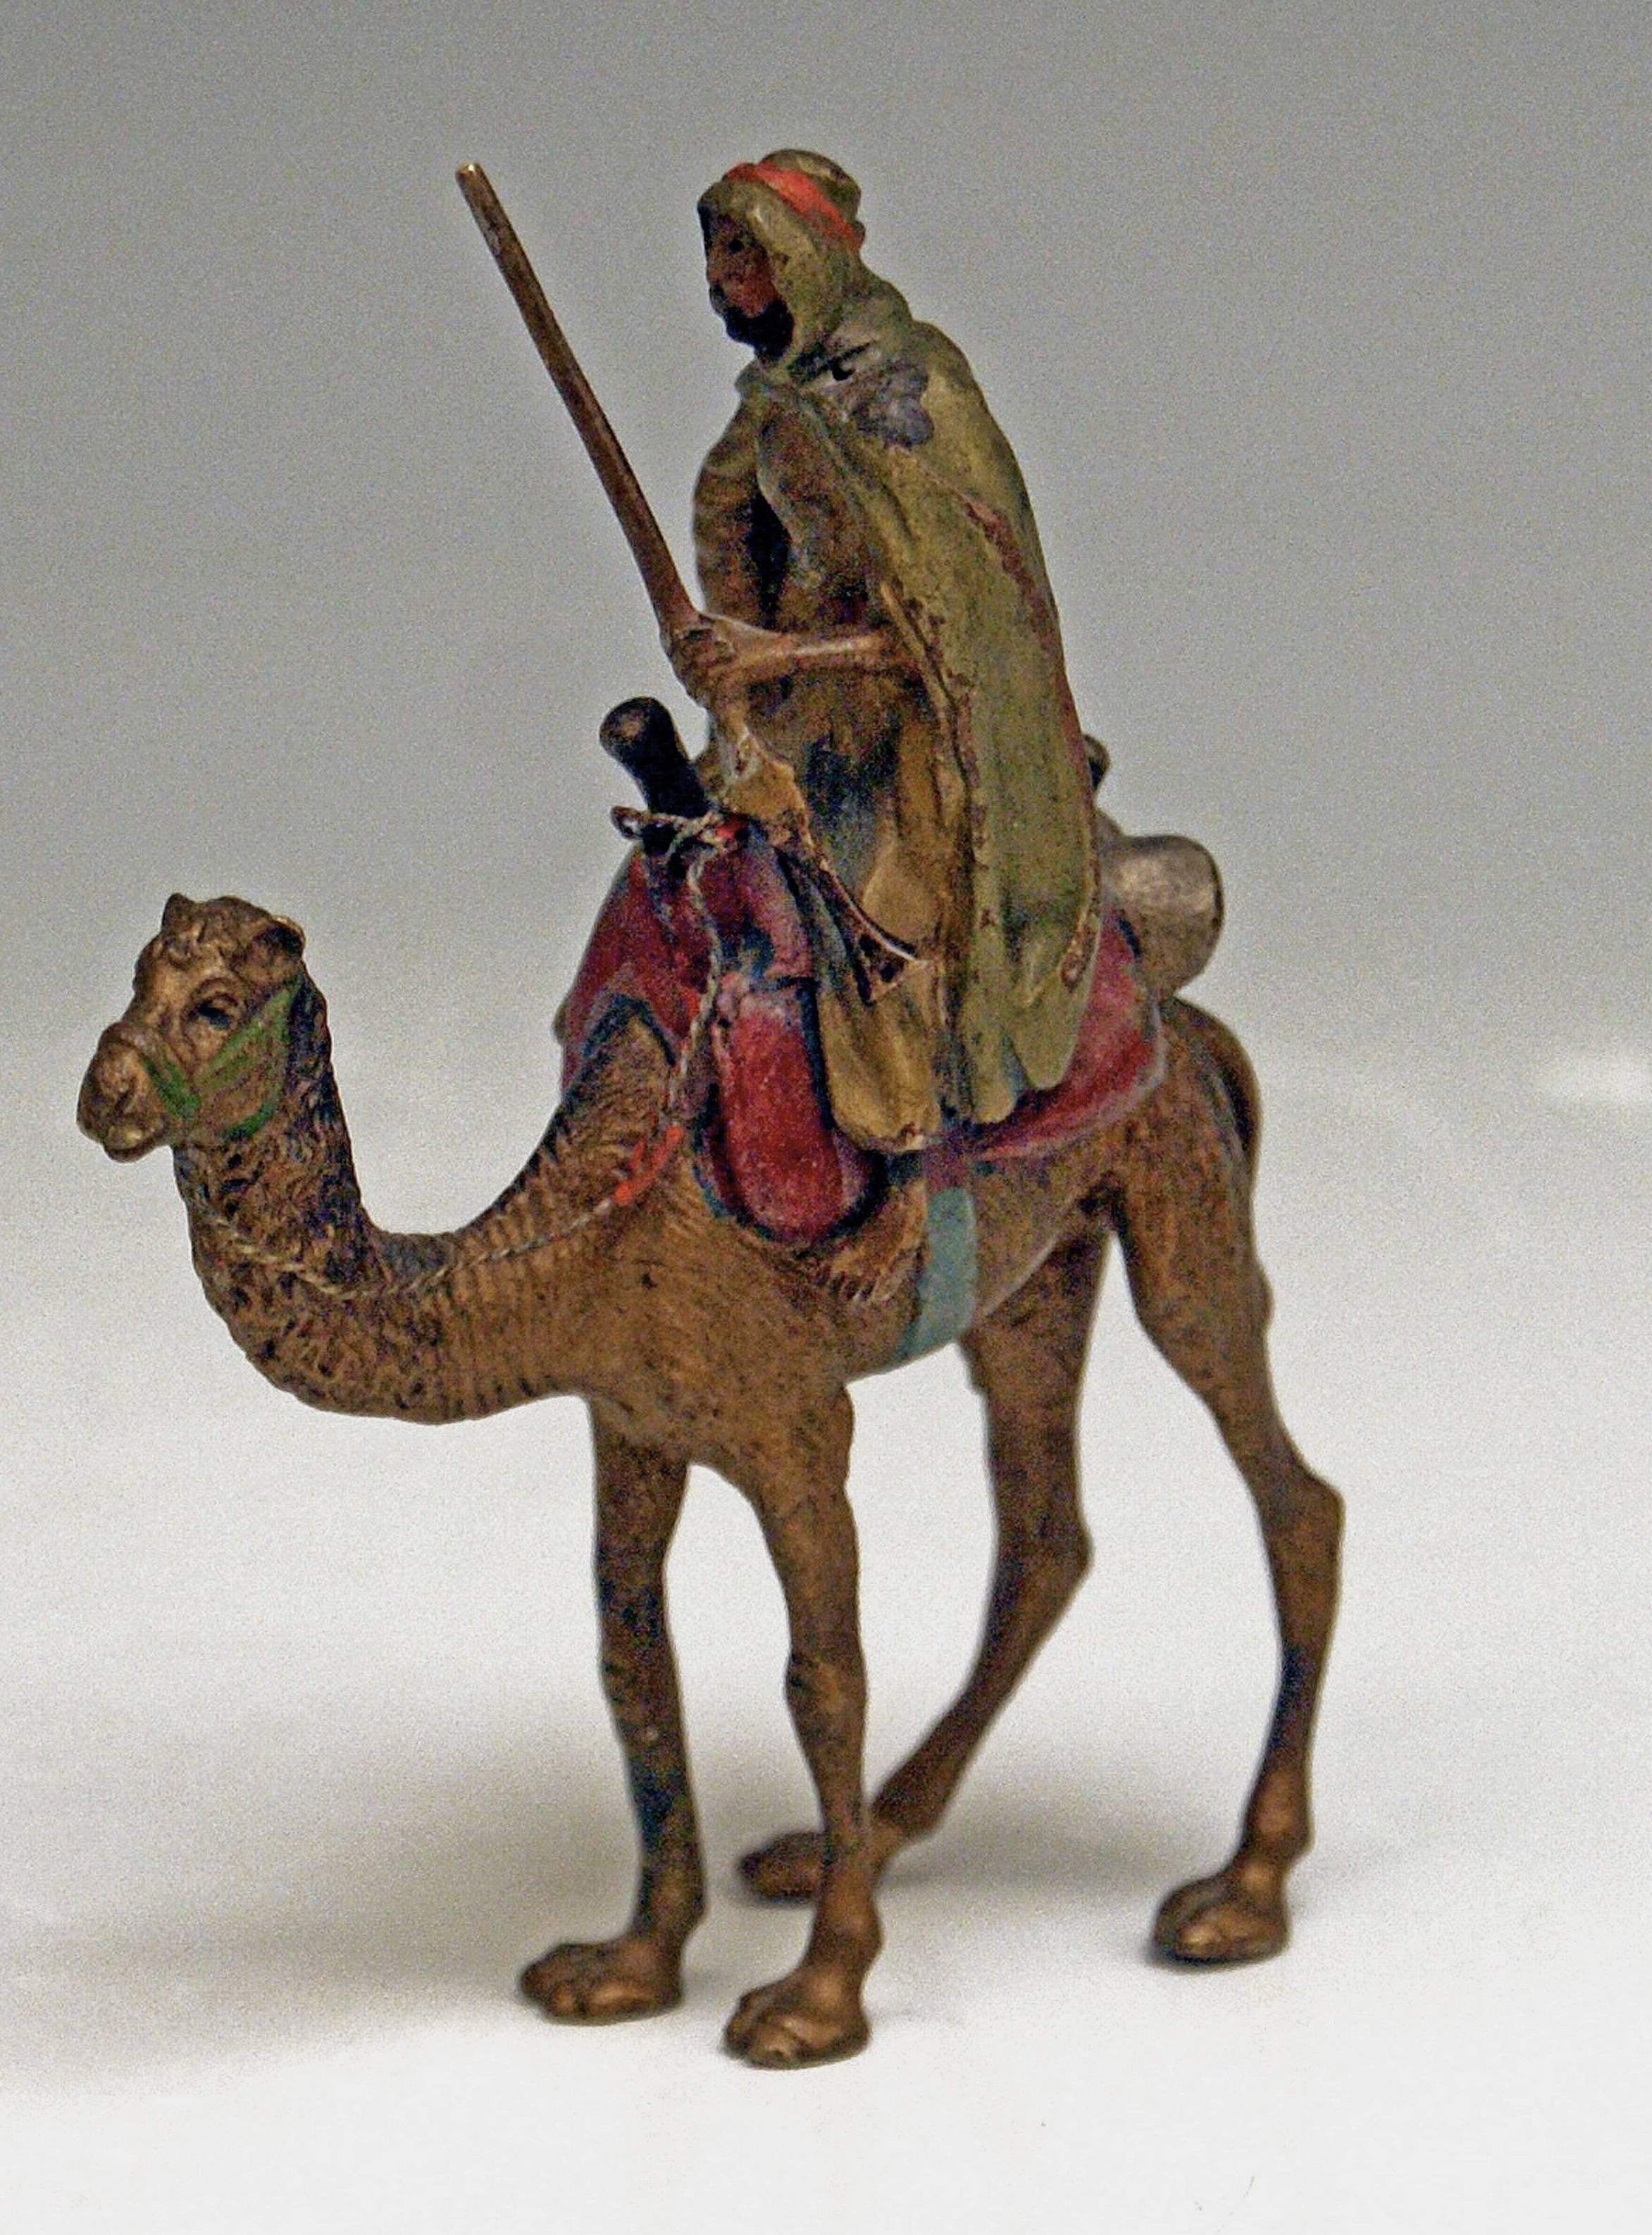 Stunning bronze figurine en miniature: Arab man clad in mantel riding on camel 

An Arab man holding a rifle rides on camel.
This bronze figurine en miniature is of Stunning Liveliness (finest manufacturing quality!). 
Signed at reverse side of